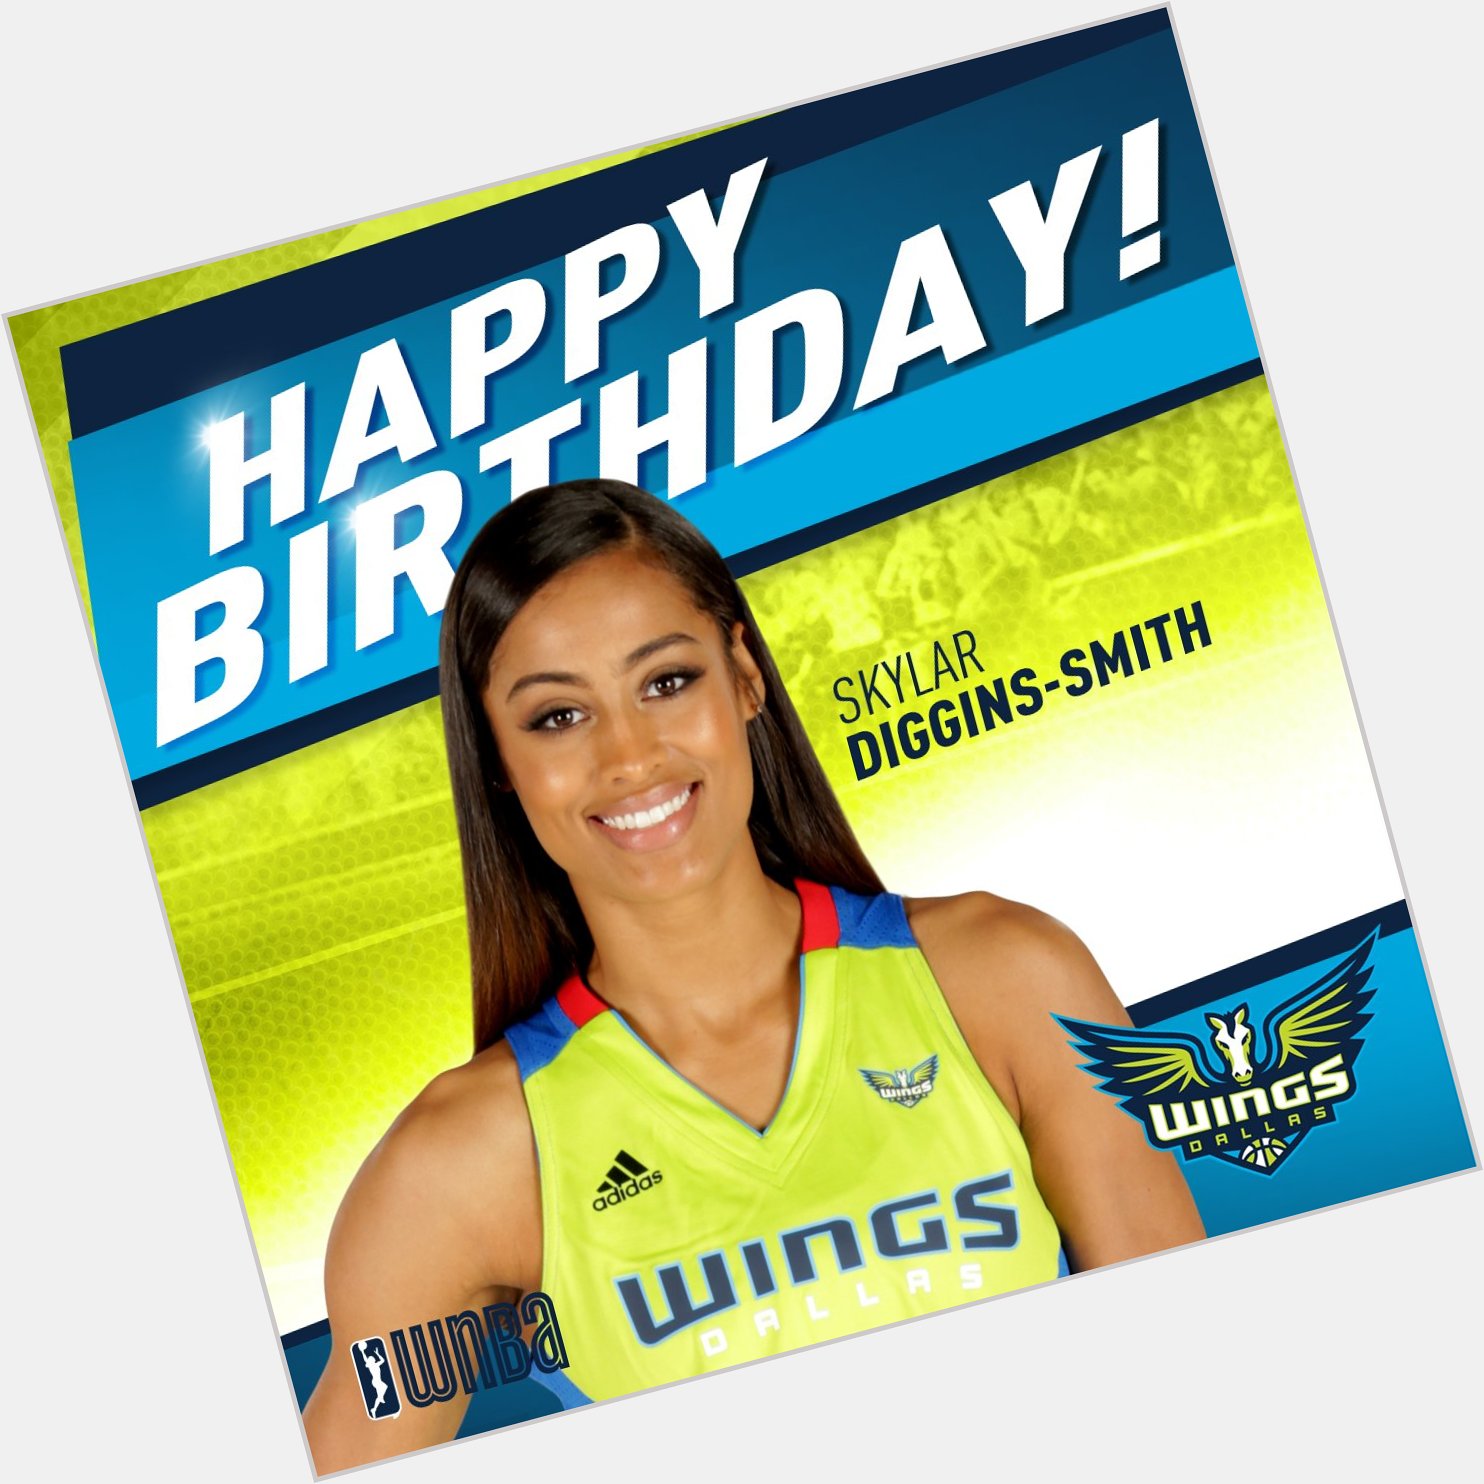 Sending a super-sized Happy Birthday to our very own Skylar Diggins-Smith! 